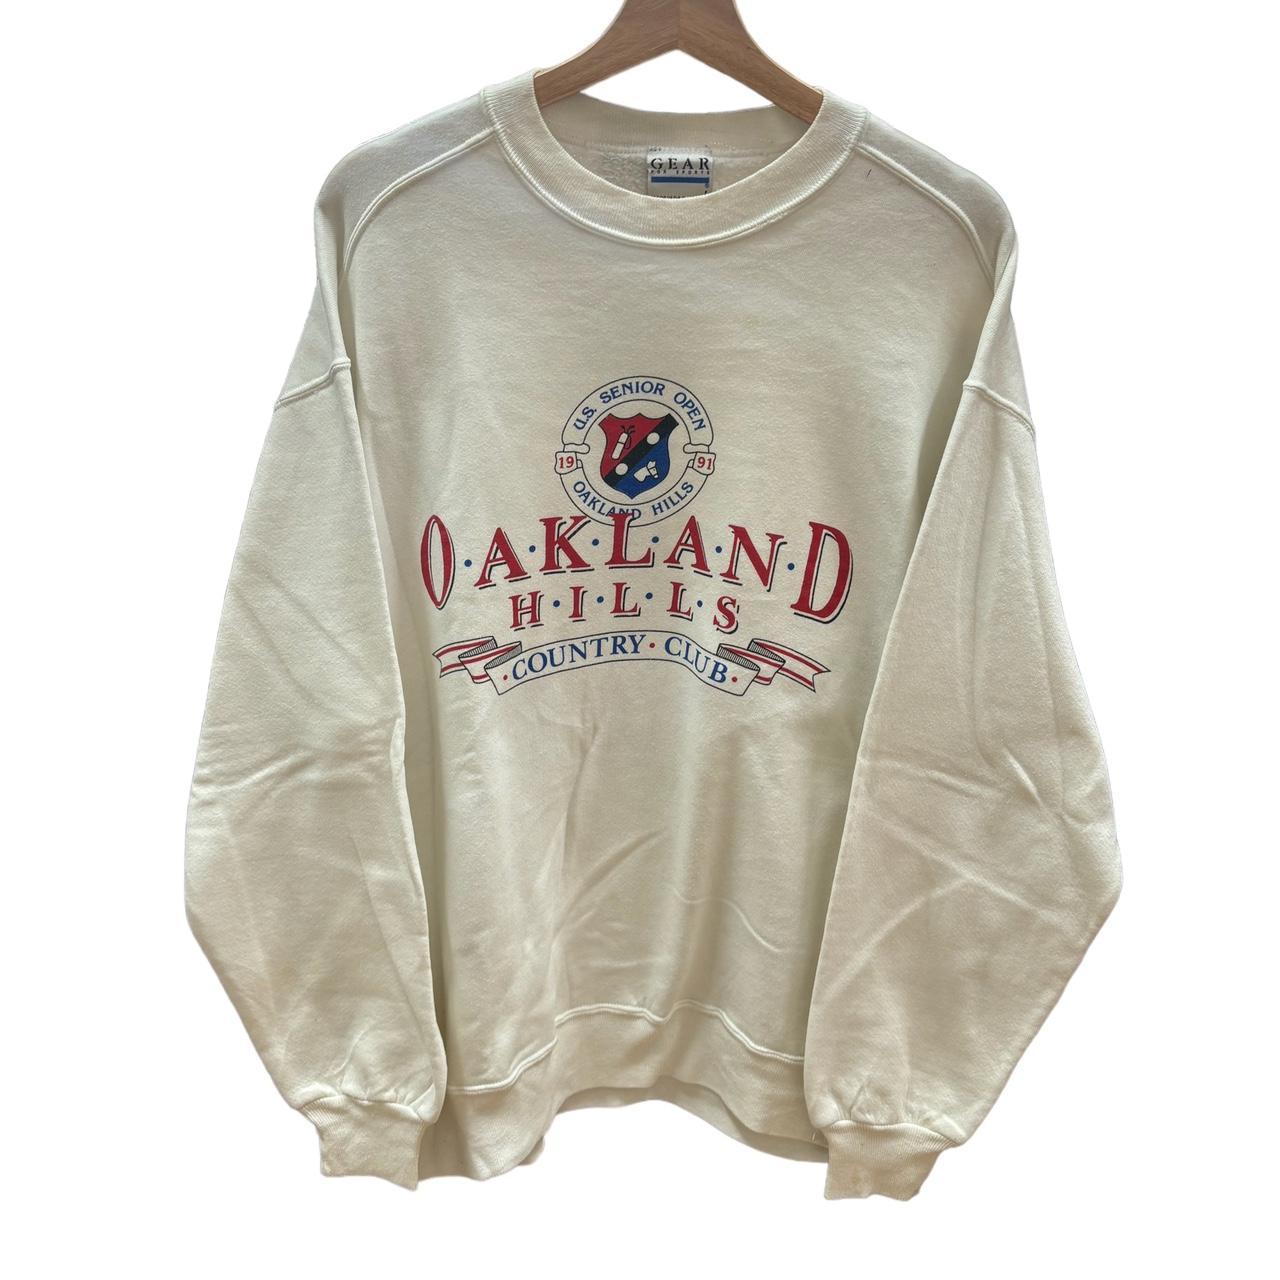 Vintage Oakland hill country club sweater size:... - Depop